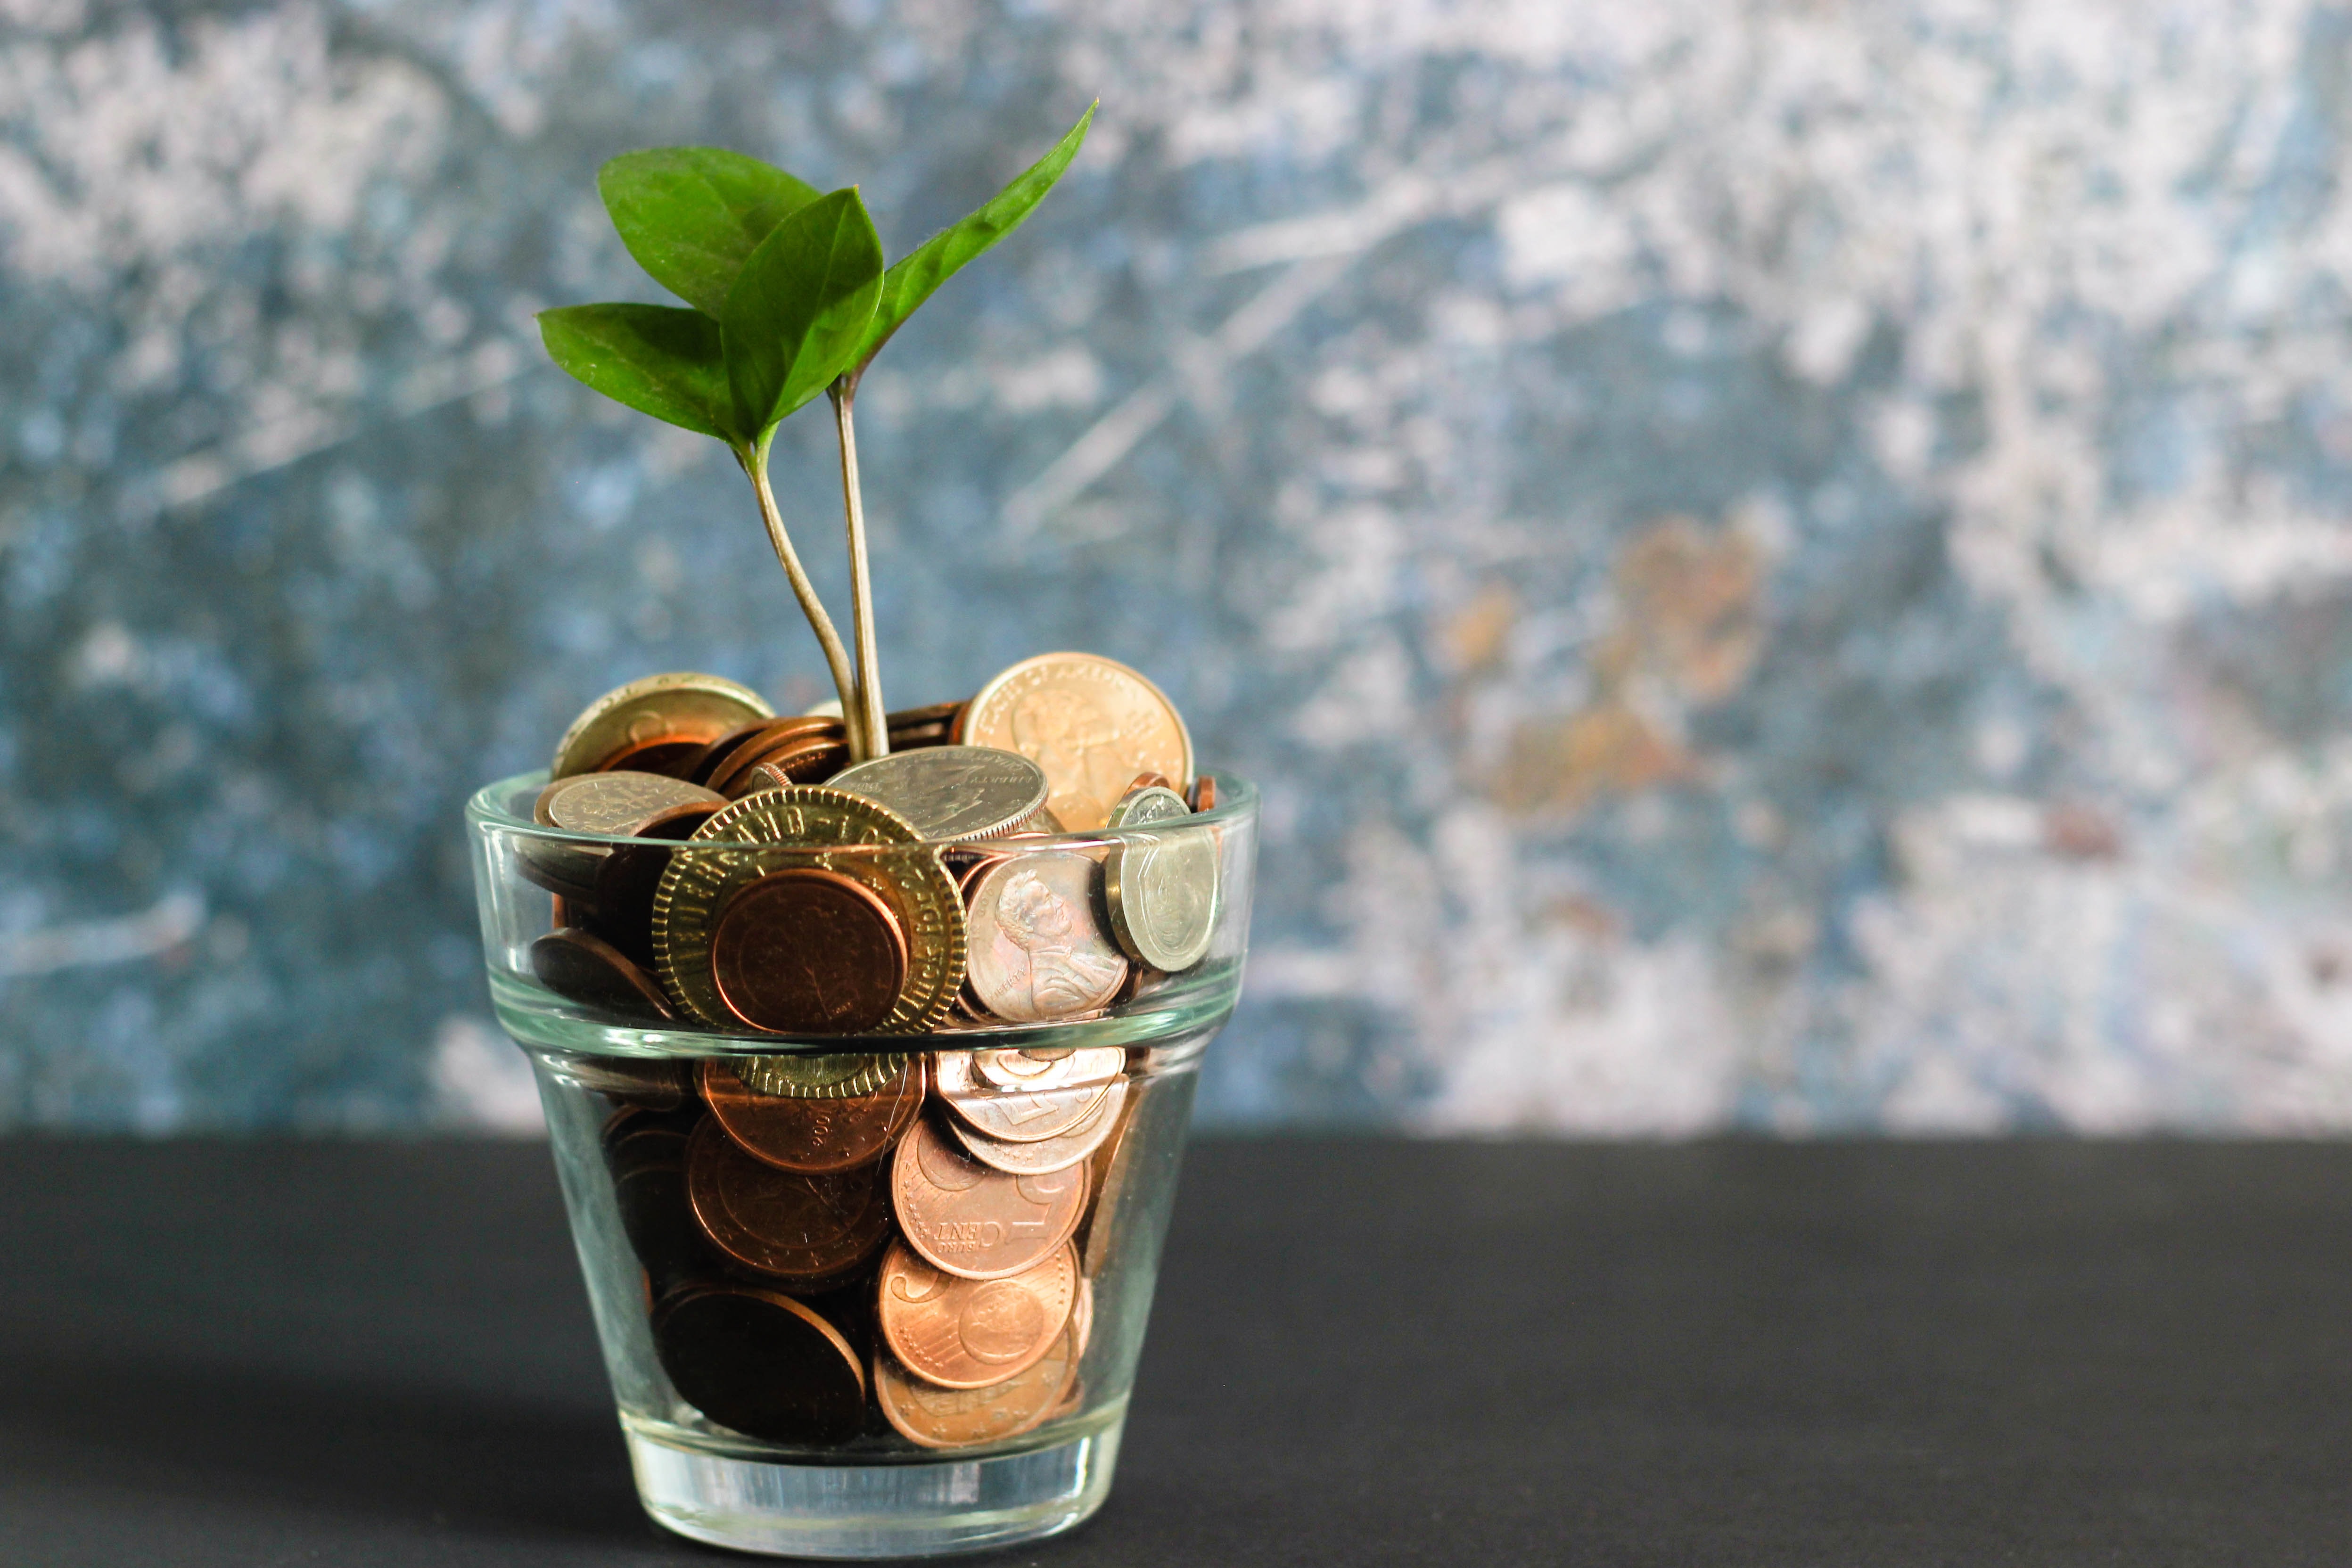 pennies-inside-a-jar-with-plant-on-top